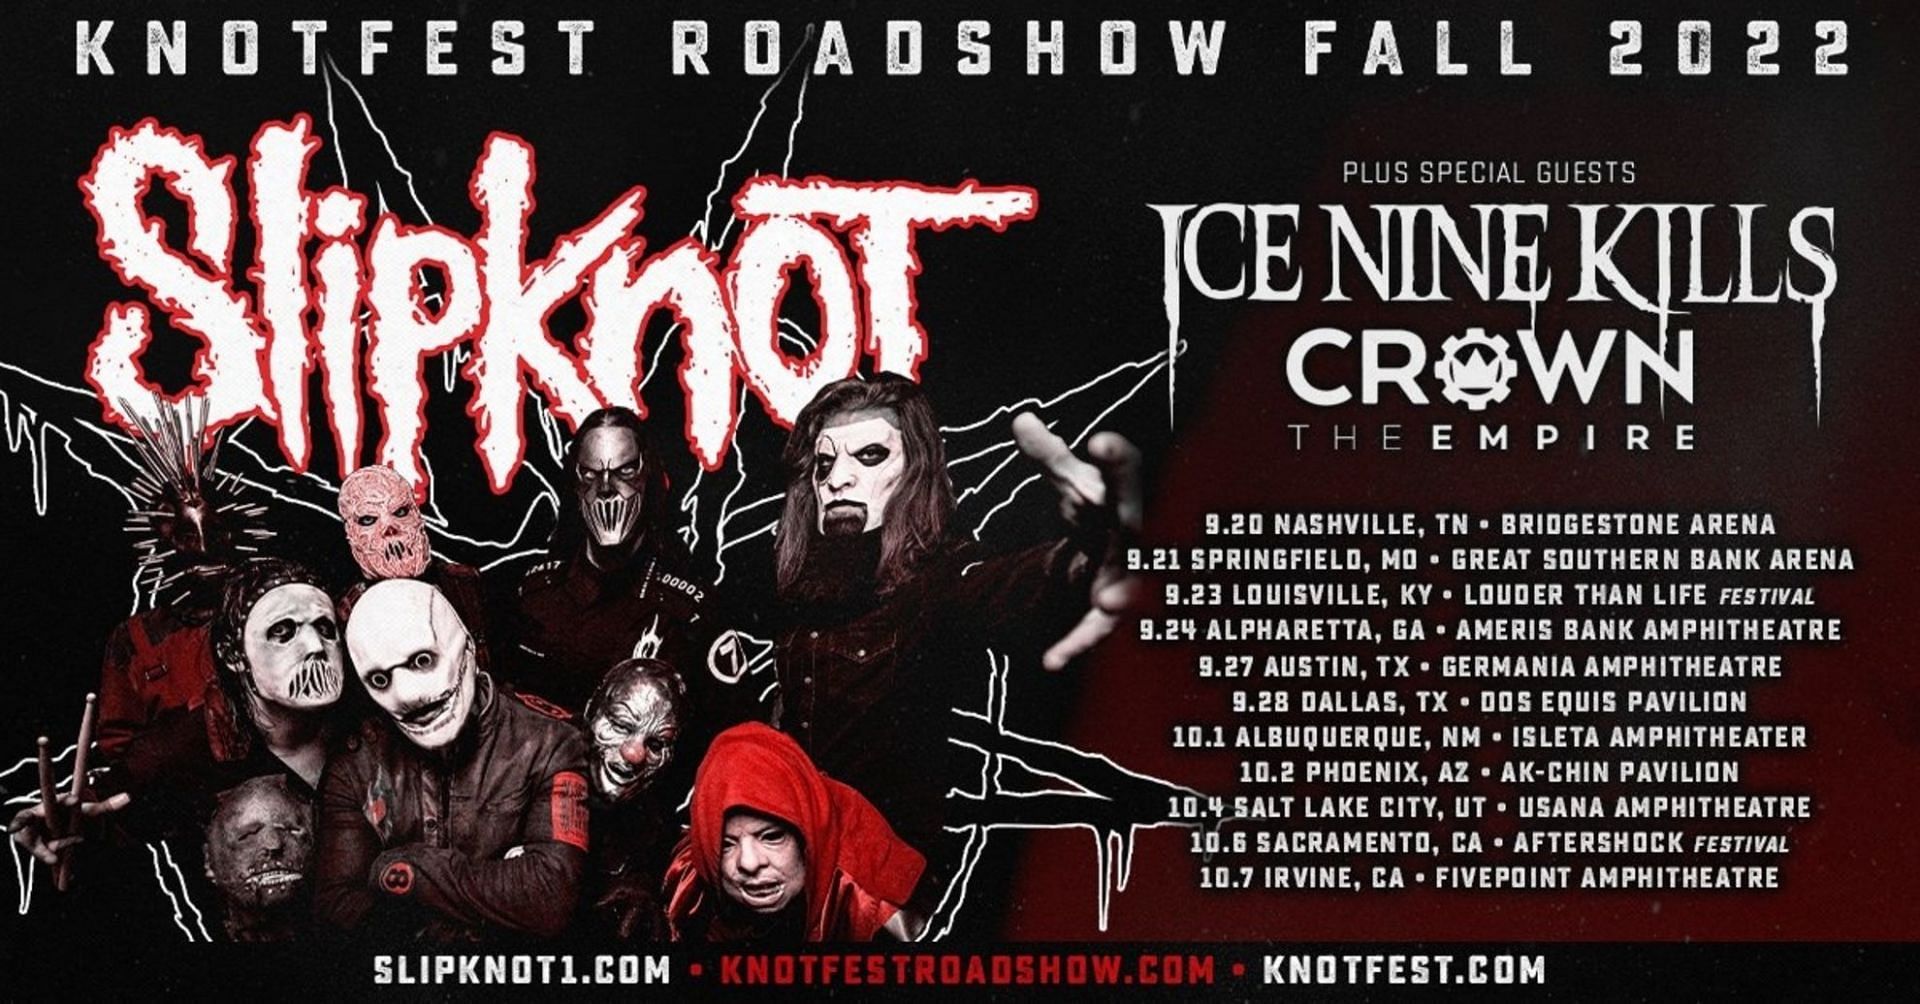 Slipknot Knotfest Roadshow 2022 Fall Tour Tickets, presale, dates and more